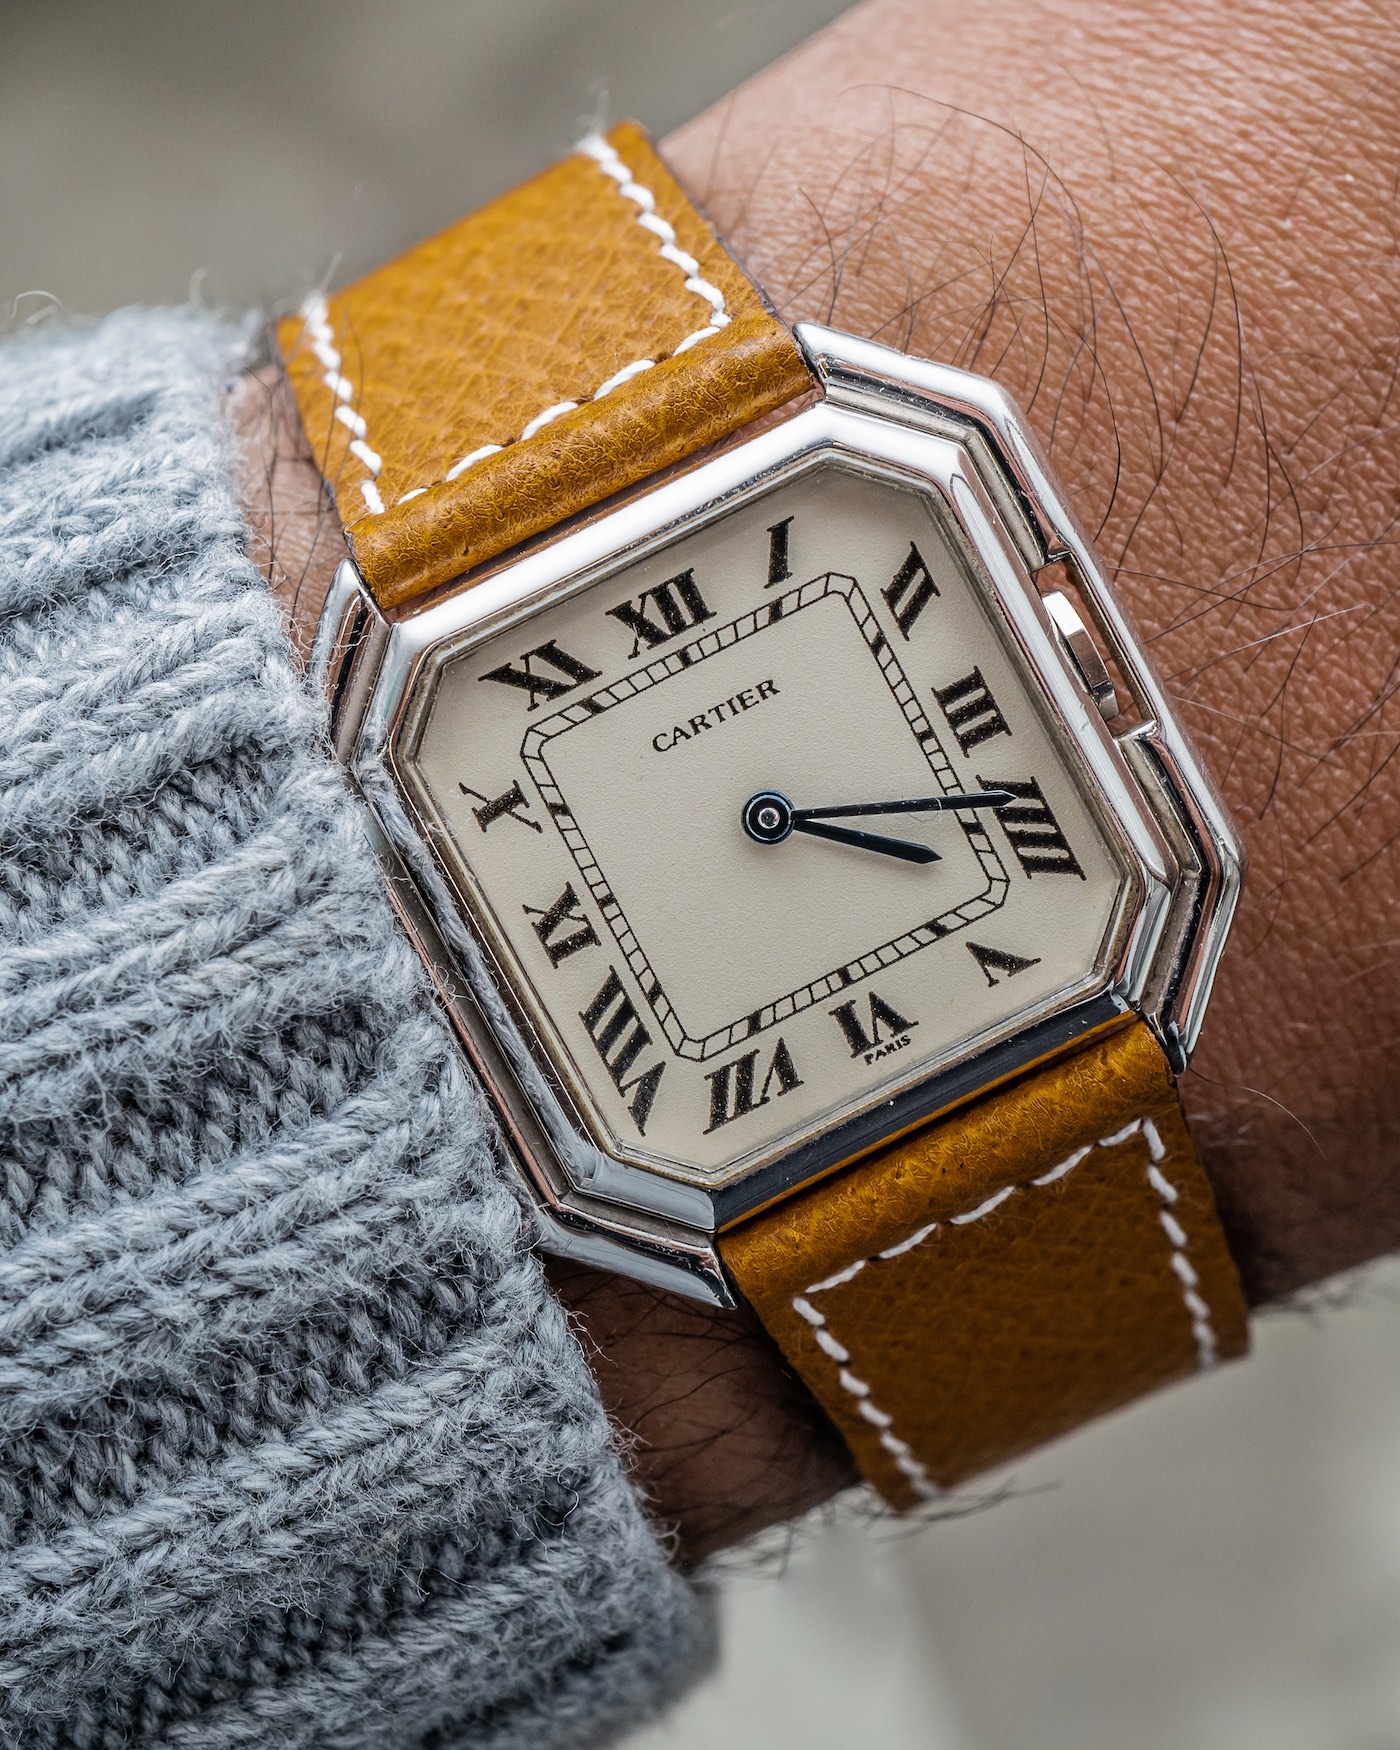 cartier old collection